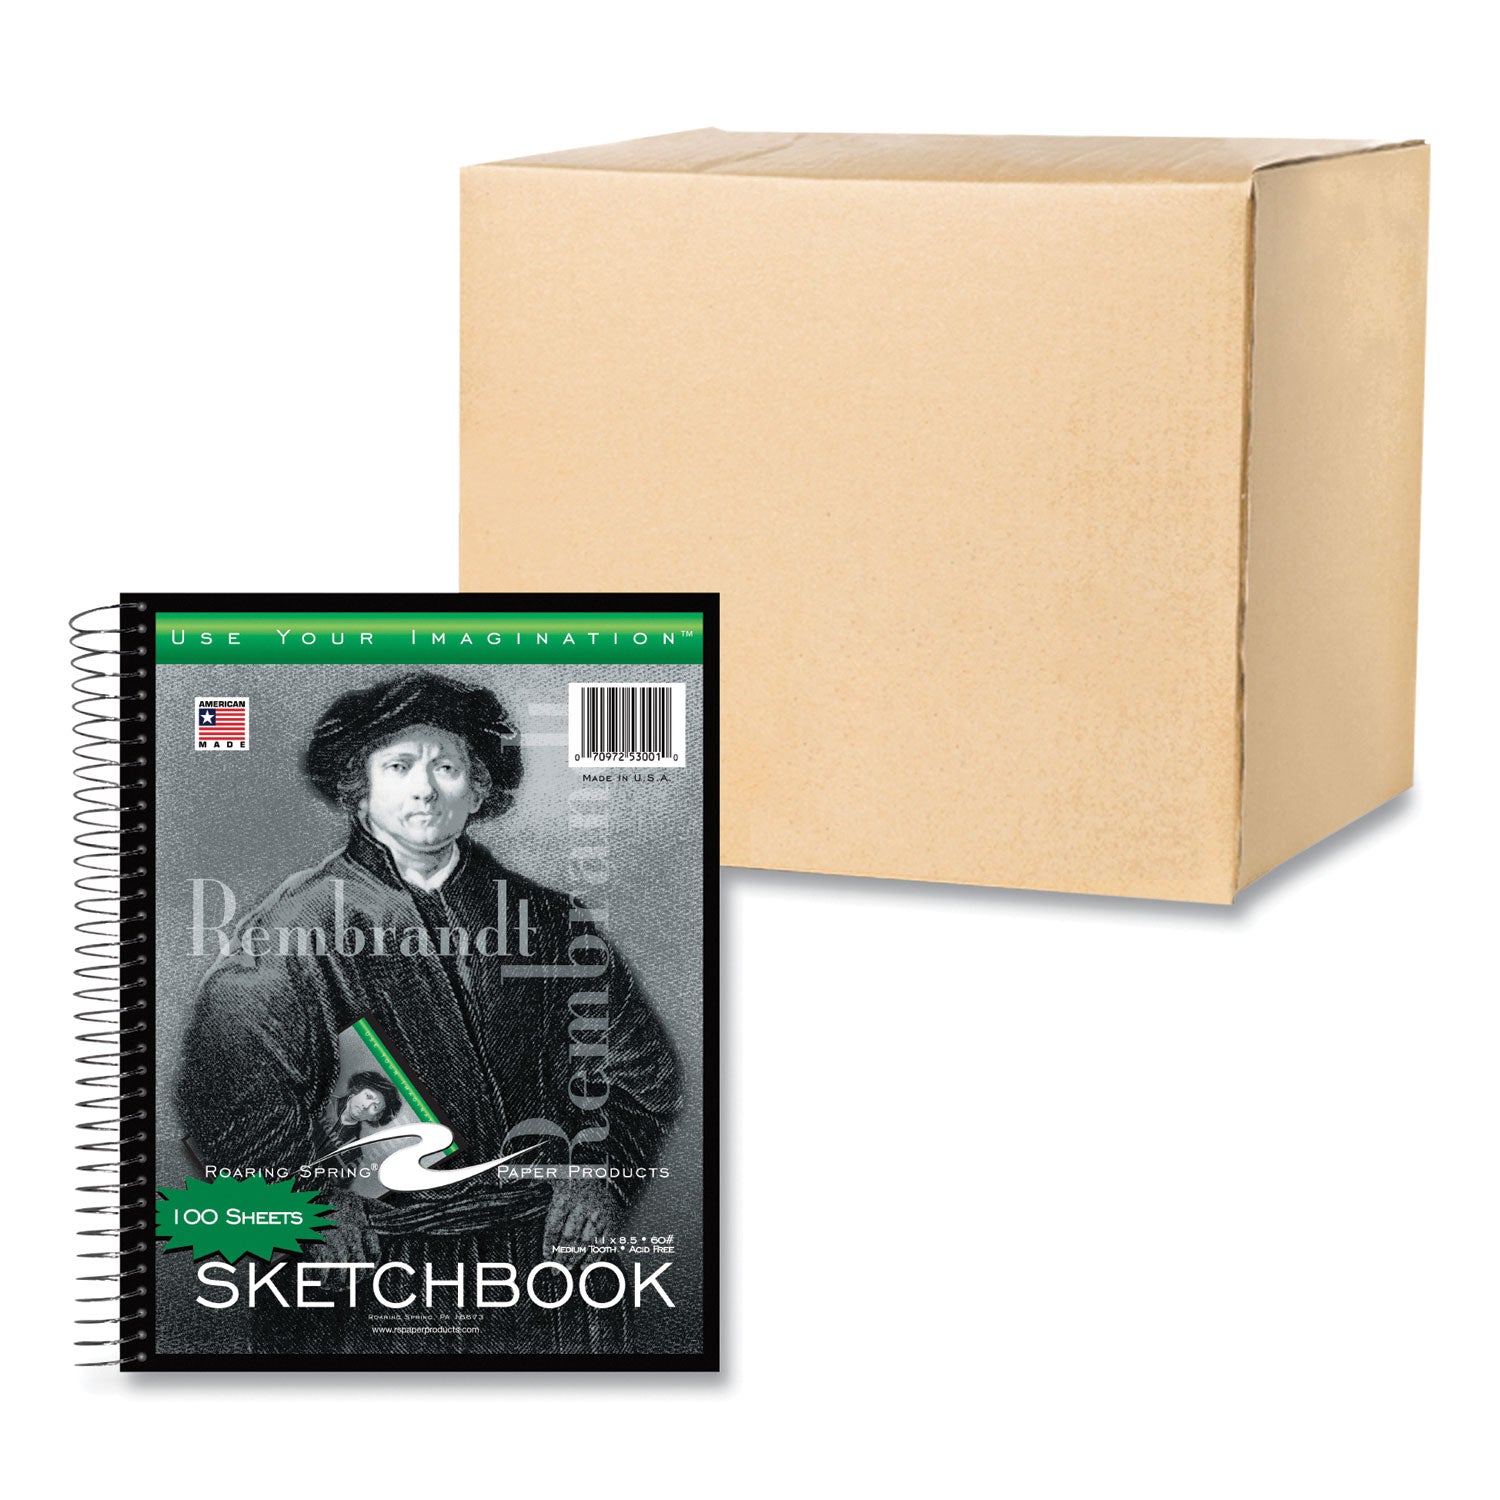 sketch-book-60-lb-drawing-paper-stock-rembrandt-photography-cover-100-11-x-85-sheets12-ct-ships-in-4-6-business-days_roa53101cs - 1